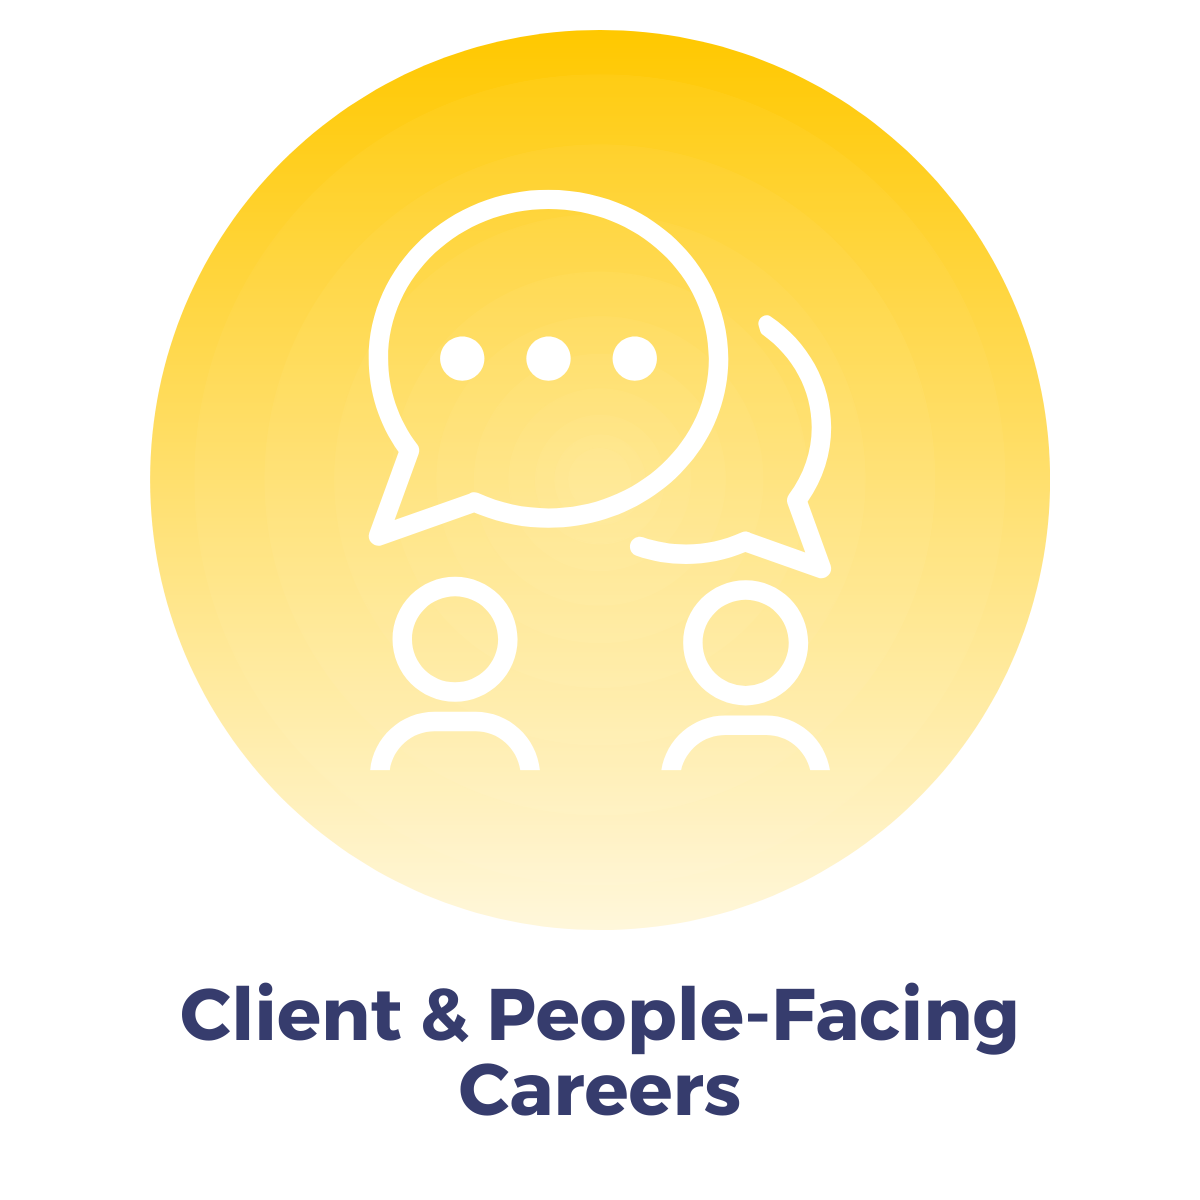 Client & People-Facing Careers